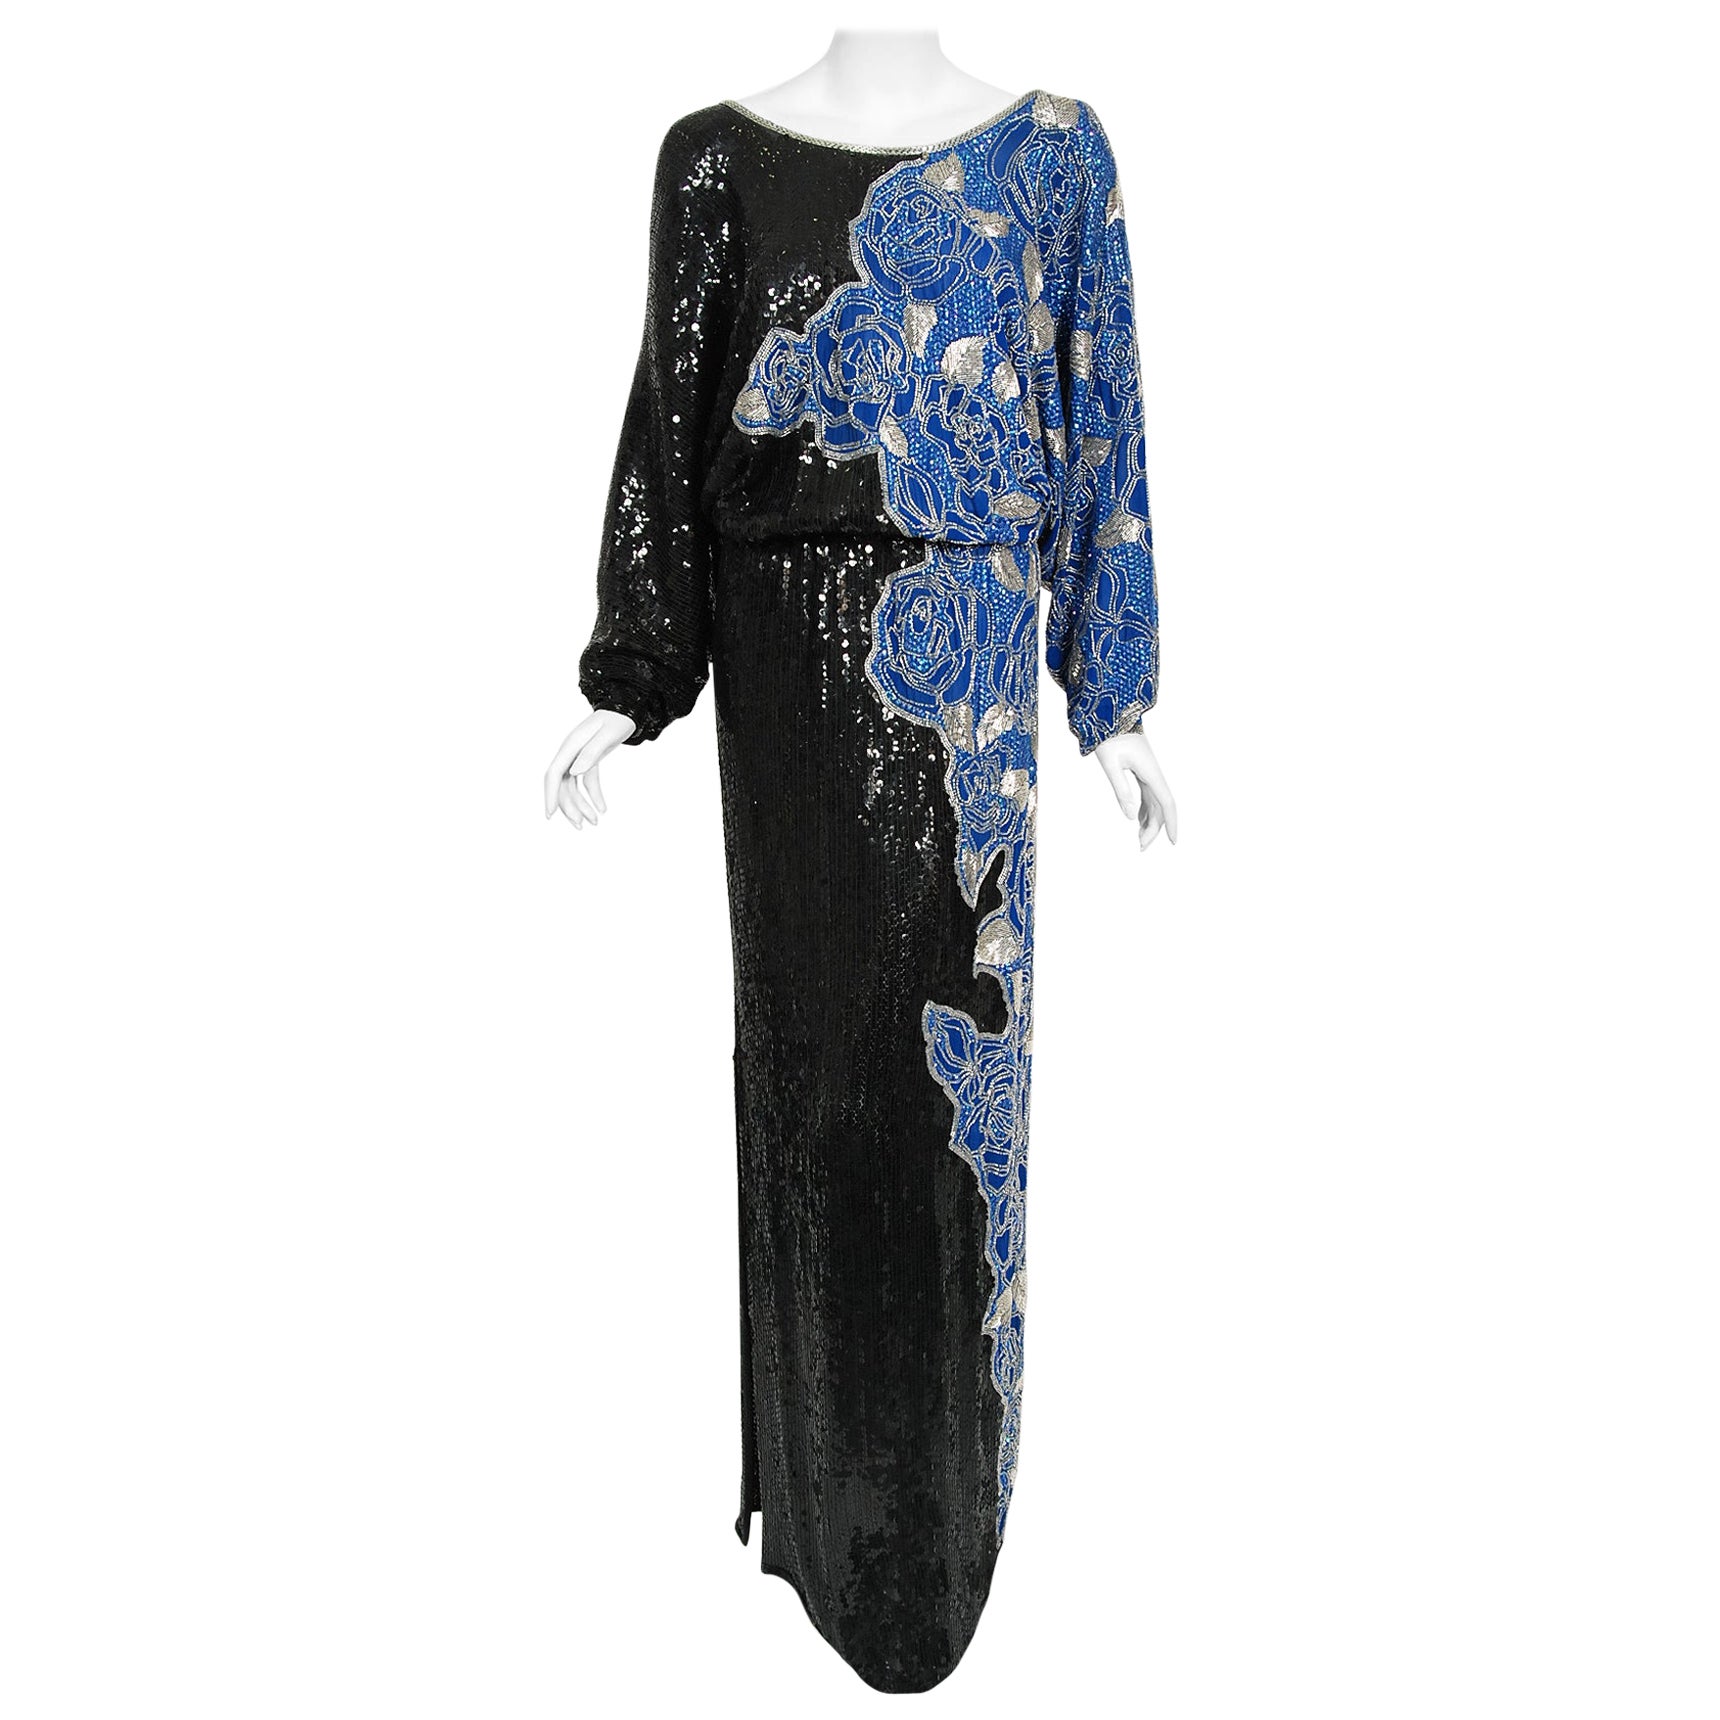 Vintage 1970s Halston Couture Beaded Sequin Black & Blue Silk Dolman-Sleeve Gown